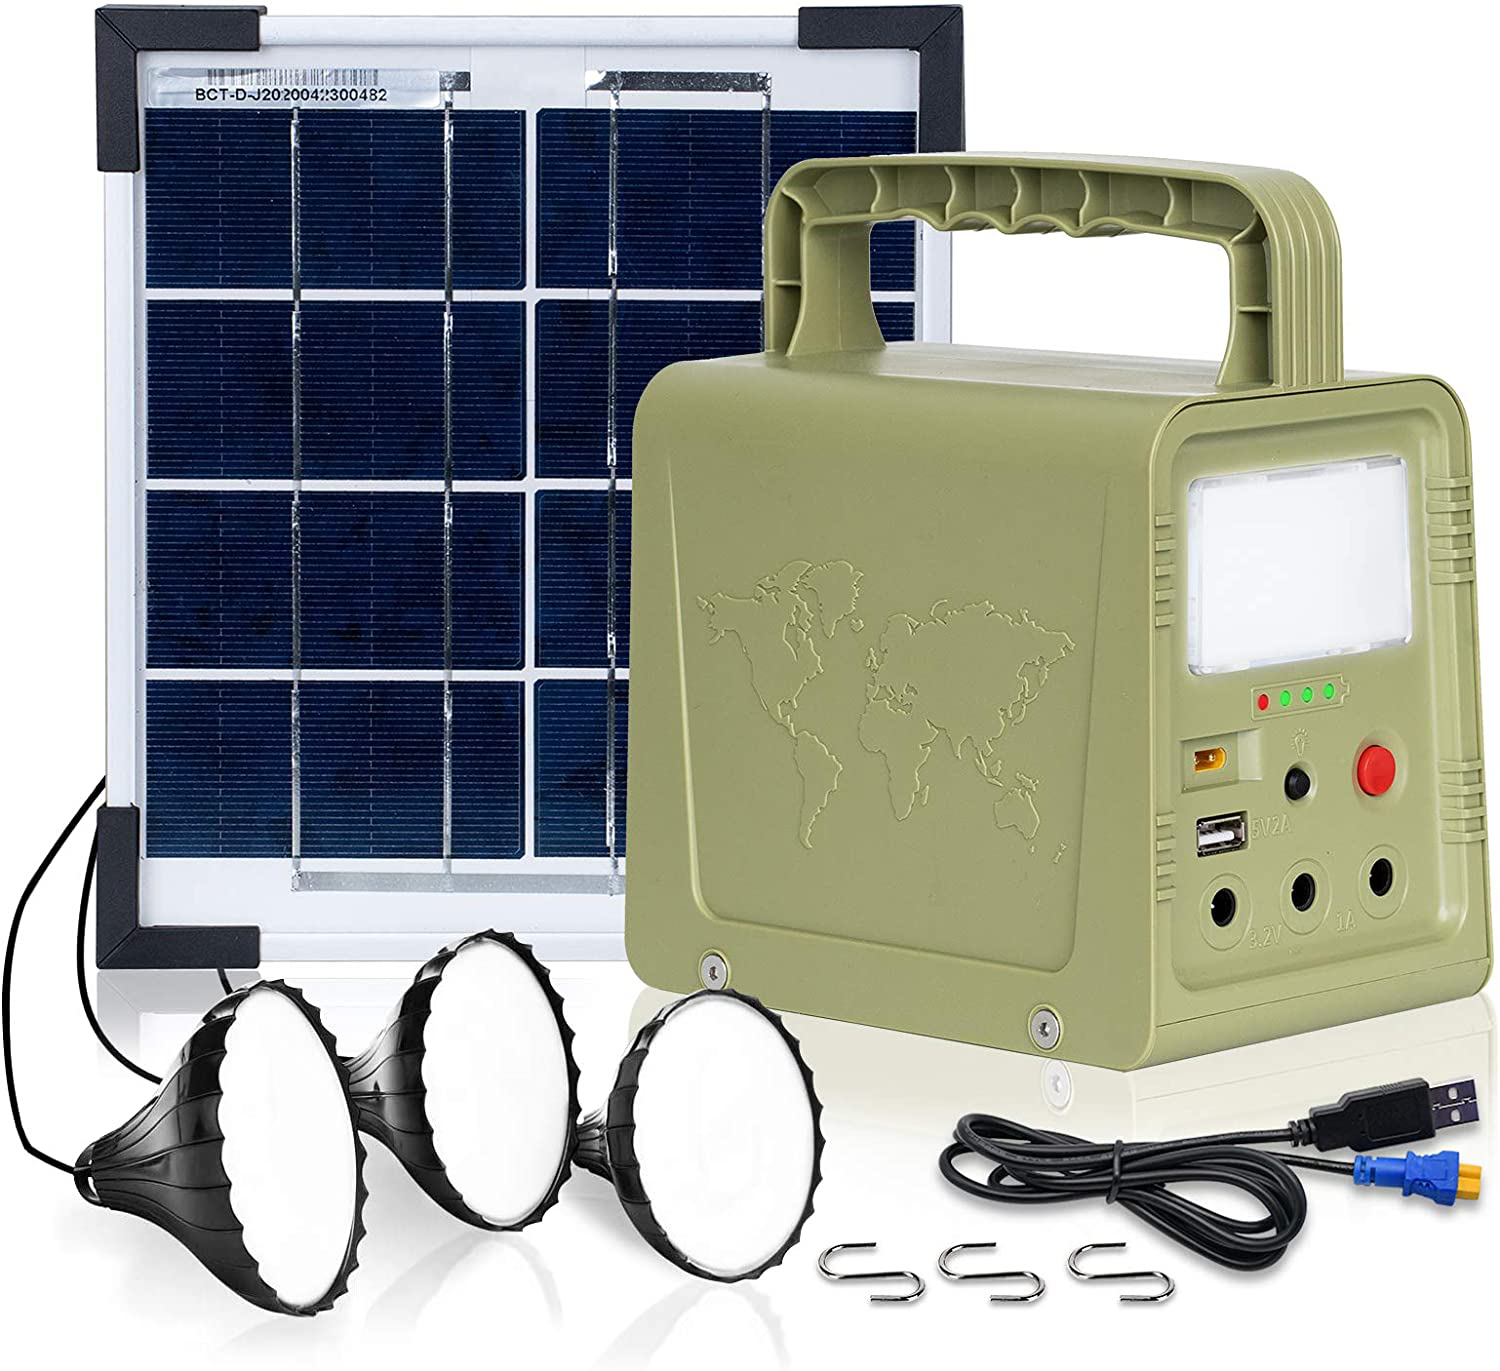 ECO-WORTHY 84Wh Portable Power Station, Solar Generator with 18W Solar Panel, Flashlights, Camp Lamps with Battery, USB DC Outlets, for Outdoor Camping, Home Emergency Power Supply, Hurricane, Fish